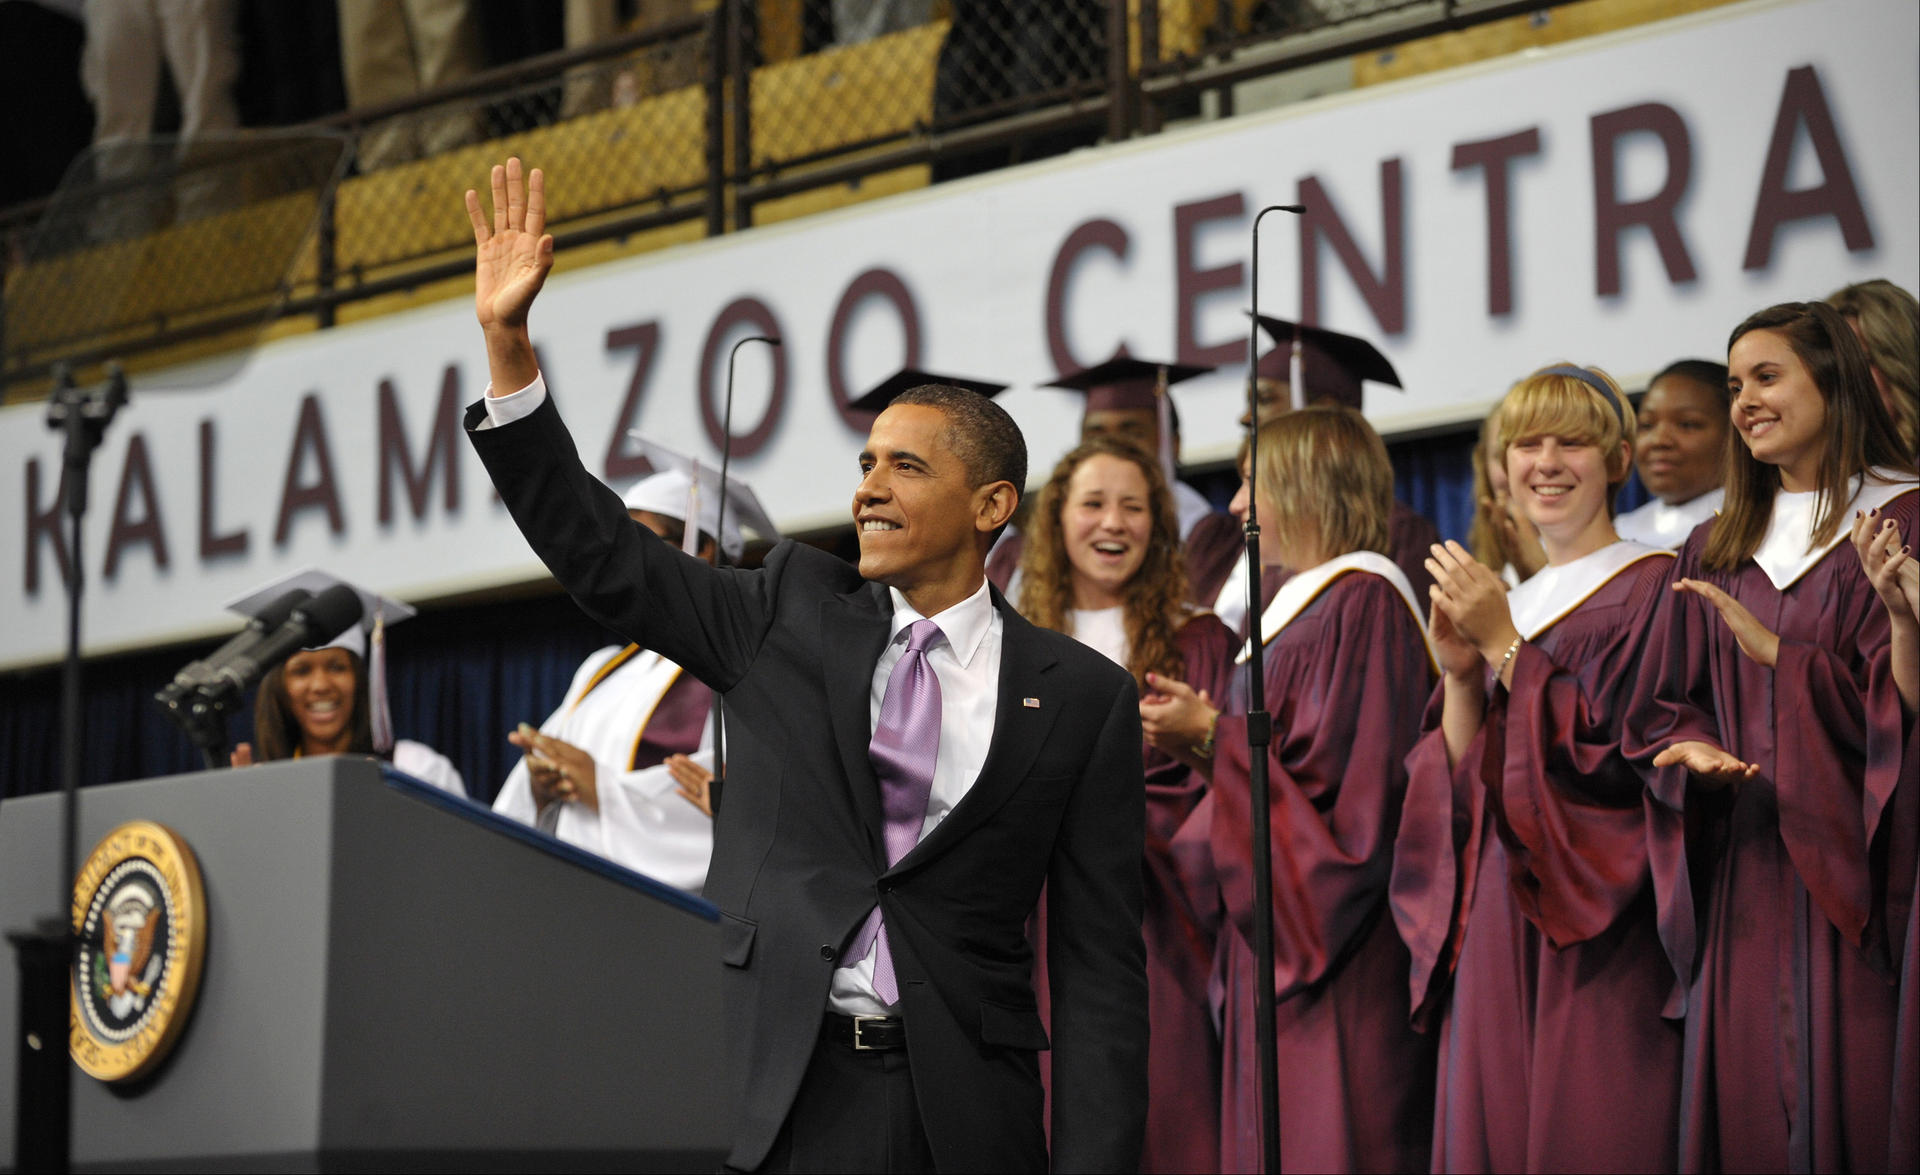 President Obama at Kalamazoo Central High School's graduation ceremony in the summer of 2010. Photo: Agence France-Presse